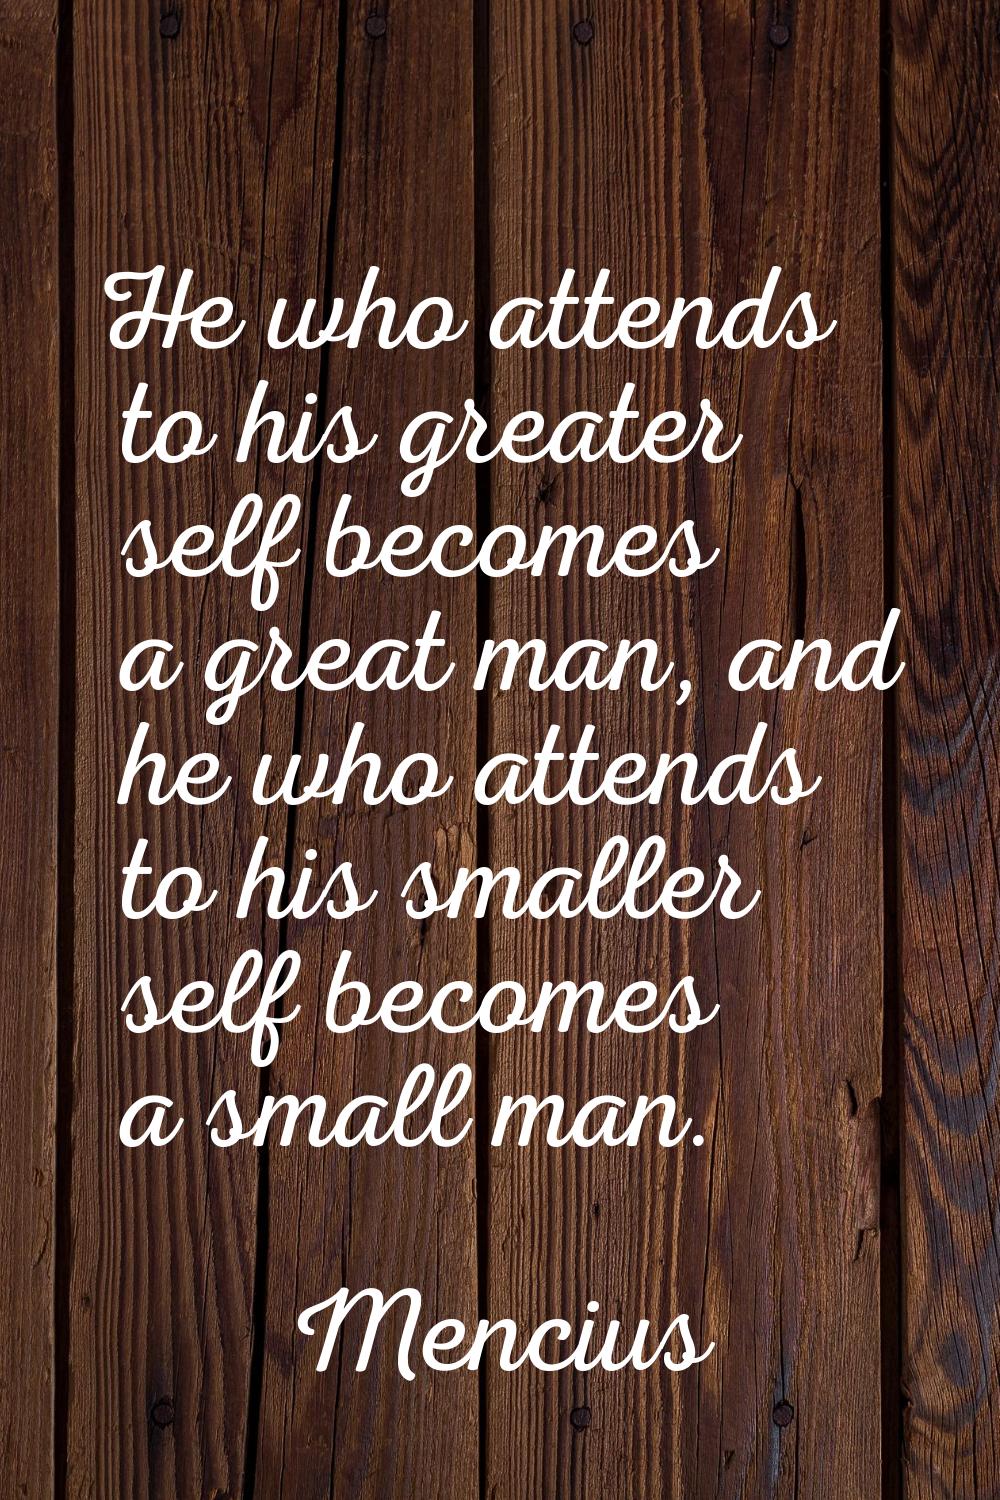 He who attends to his greater self becomes a great man, and he who attends to his smaller self beco